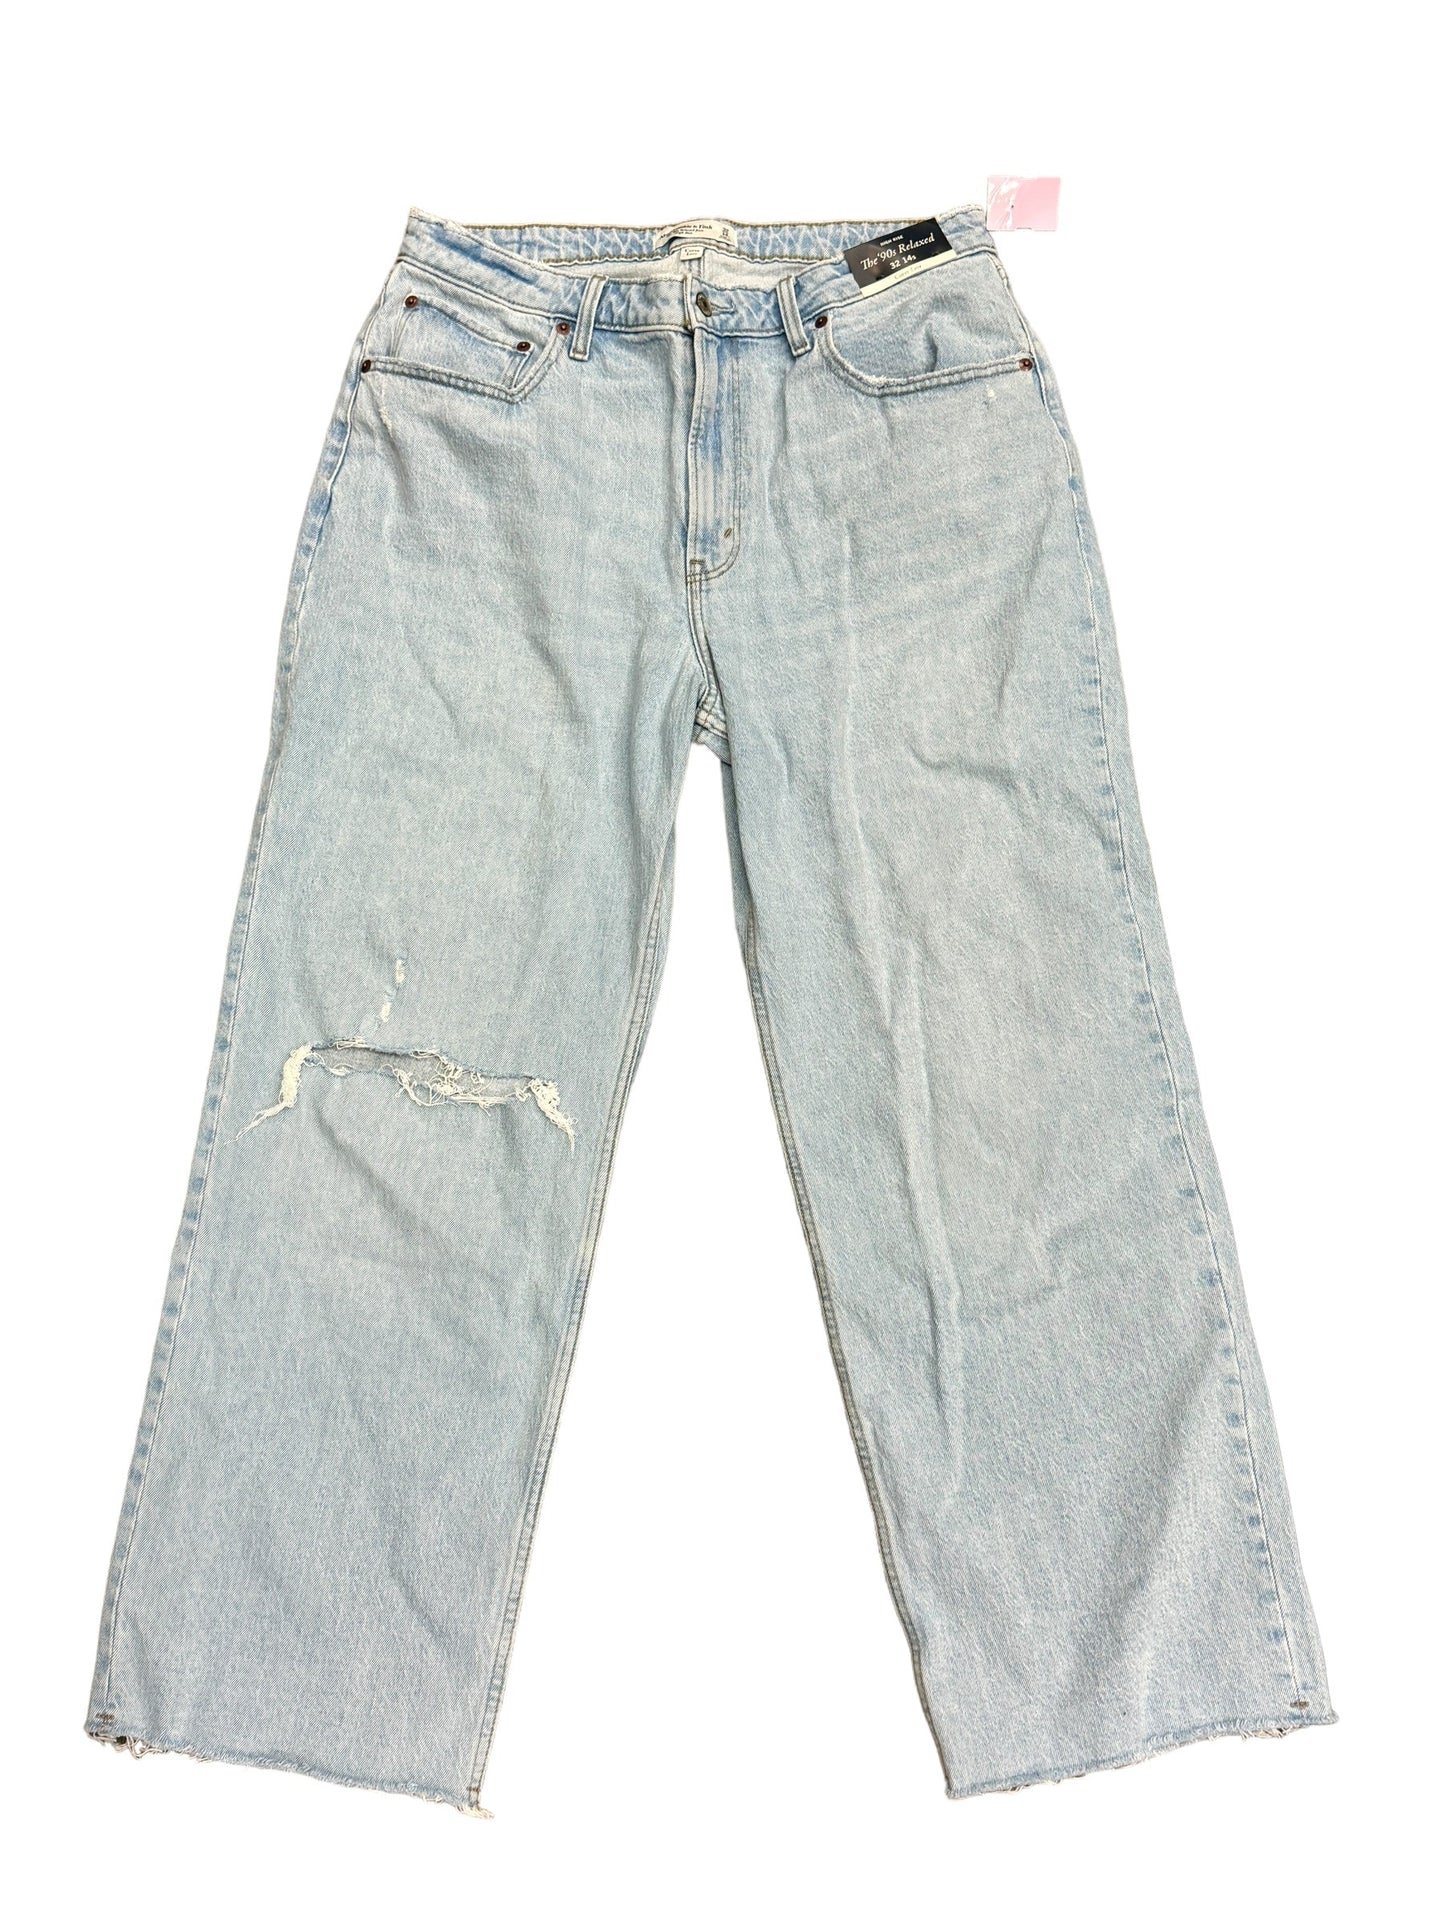 Blue Denim Jeans Straight Abercrombie And Fitch, Size 14